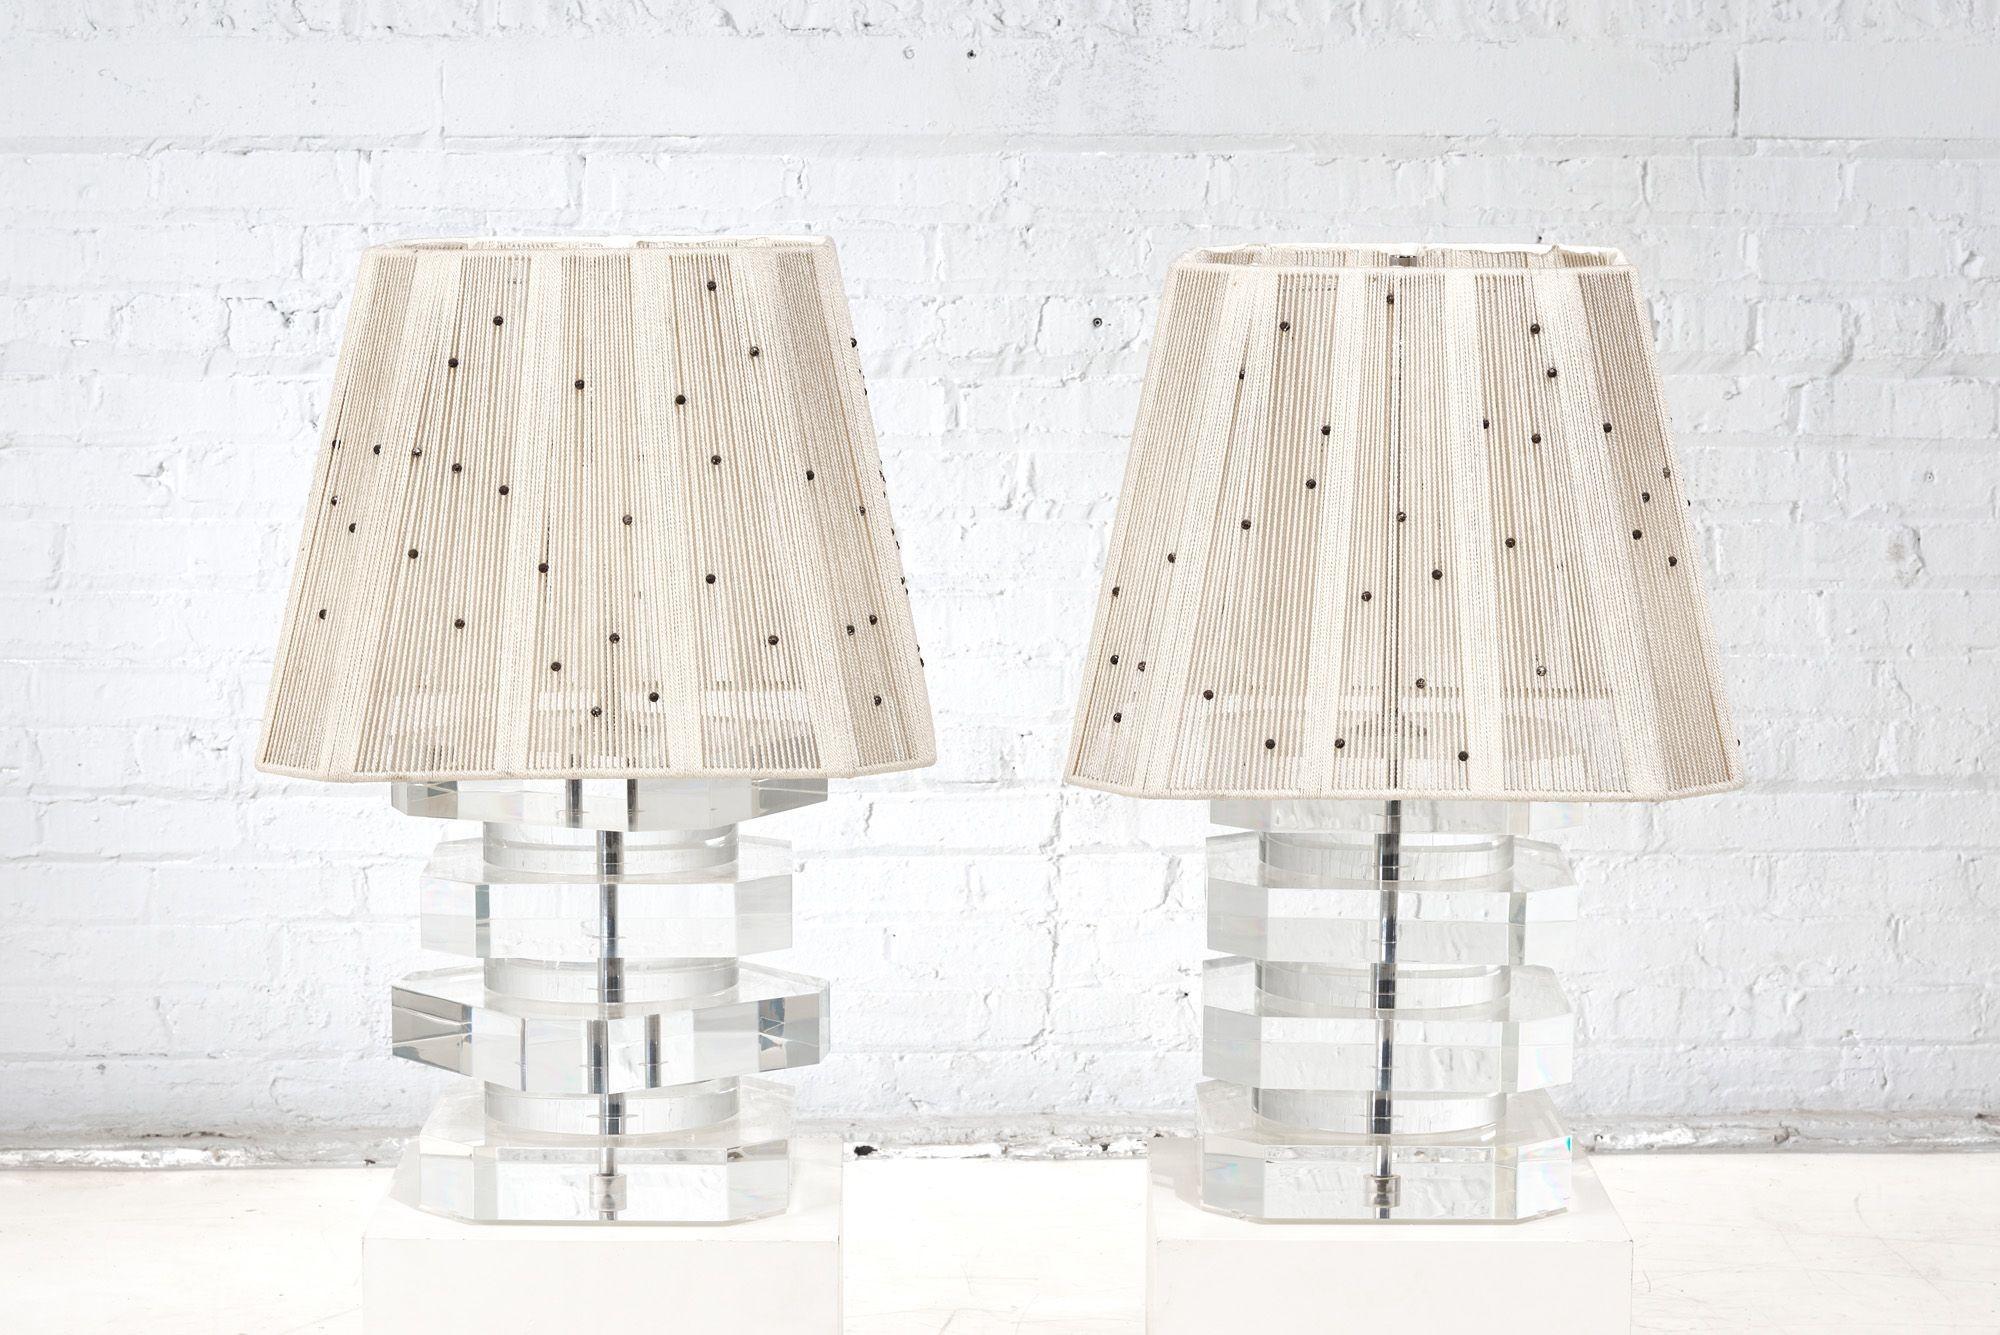 Pair Karl Springer Stacked Lucite Table Lamps, 1960 Shades included.
FREE SHIPPING ANYWHERE IN THE United States